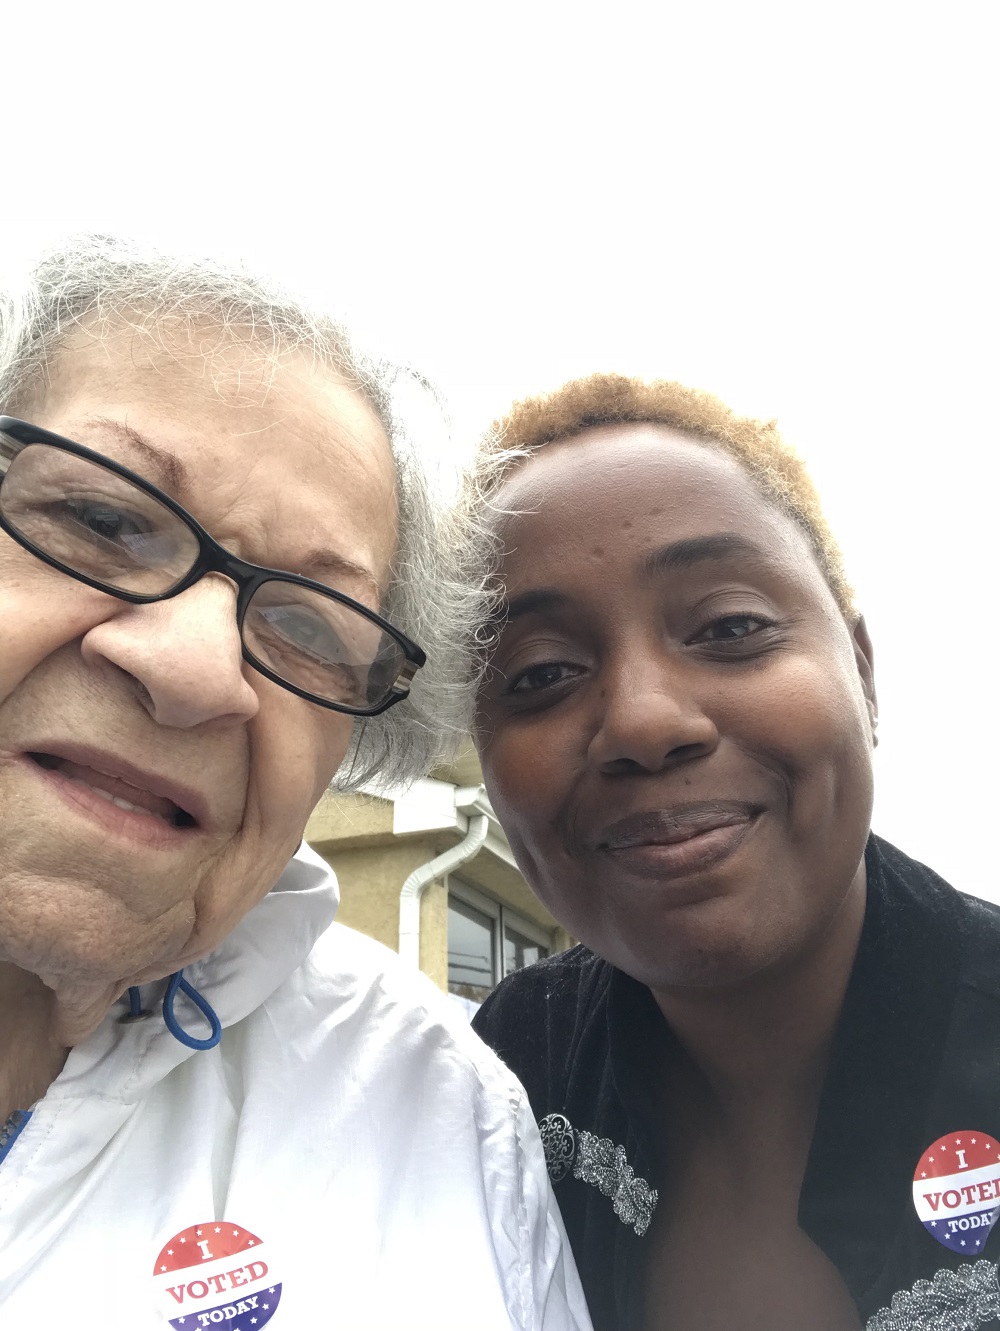 Arretta Cuff and Robin Renée wearing "I Voted" stickers after the 2018 U.S. midterm elections